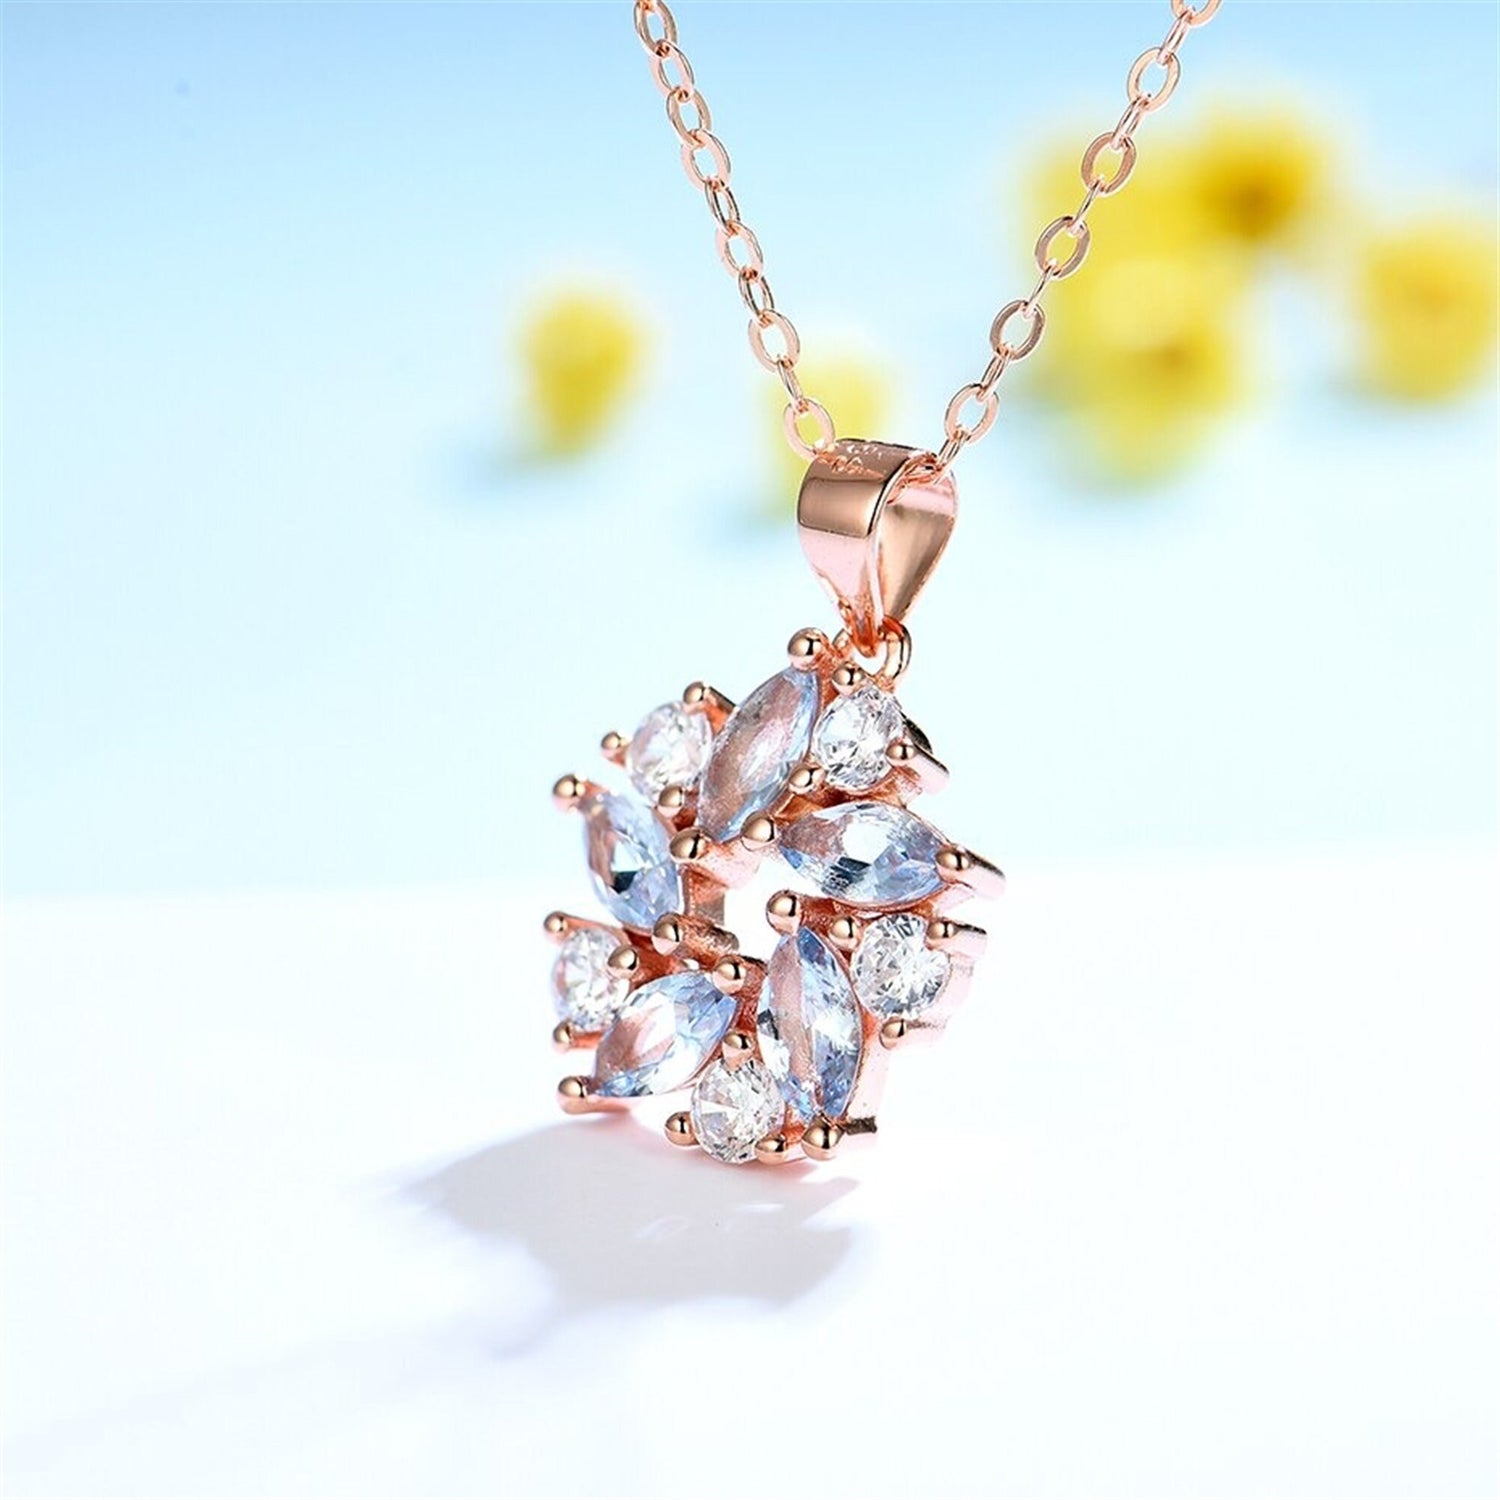 Marquise Topaz 925 Sterling Silver Jewelry Set, Marquise Topaz Gemstone Pendant Necklace and Earrings